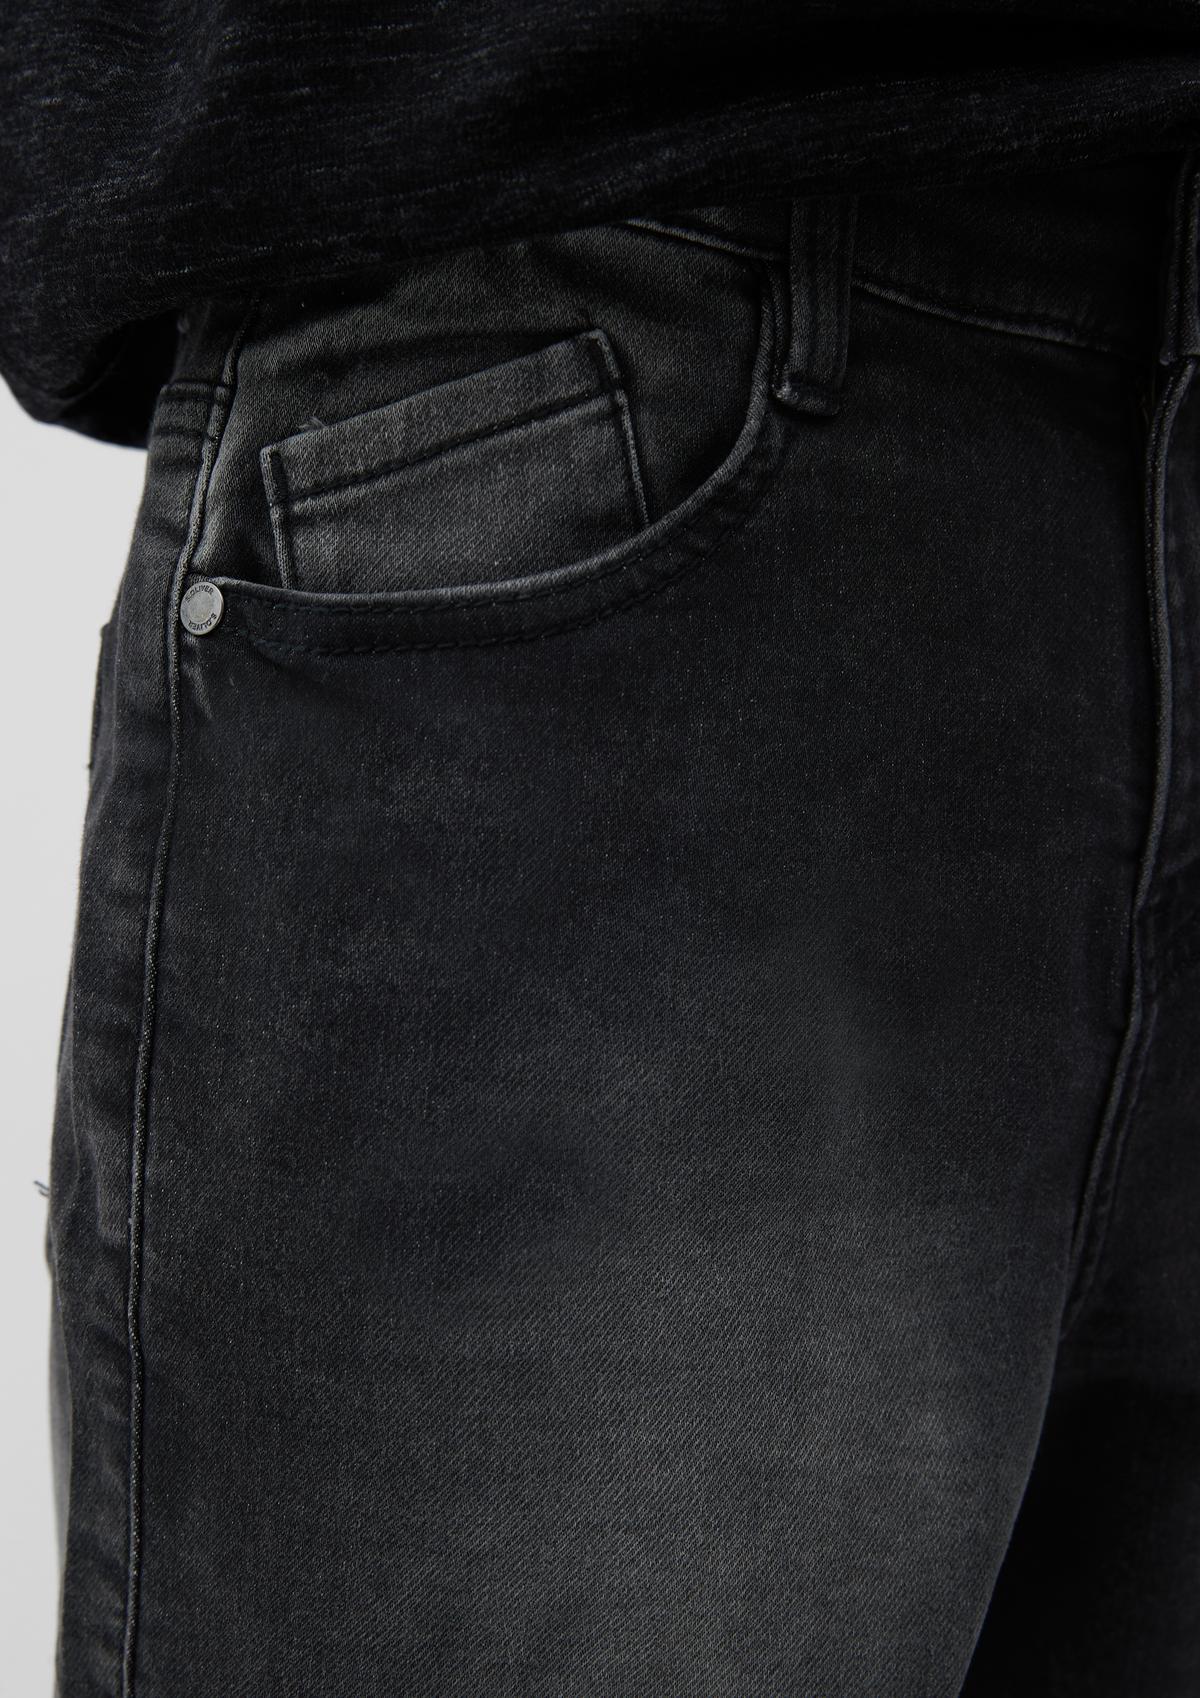 s.Oliver Jeans / Relaxed Fit / Mid Rise / Tapered Leg